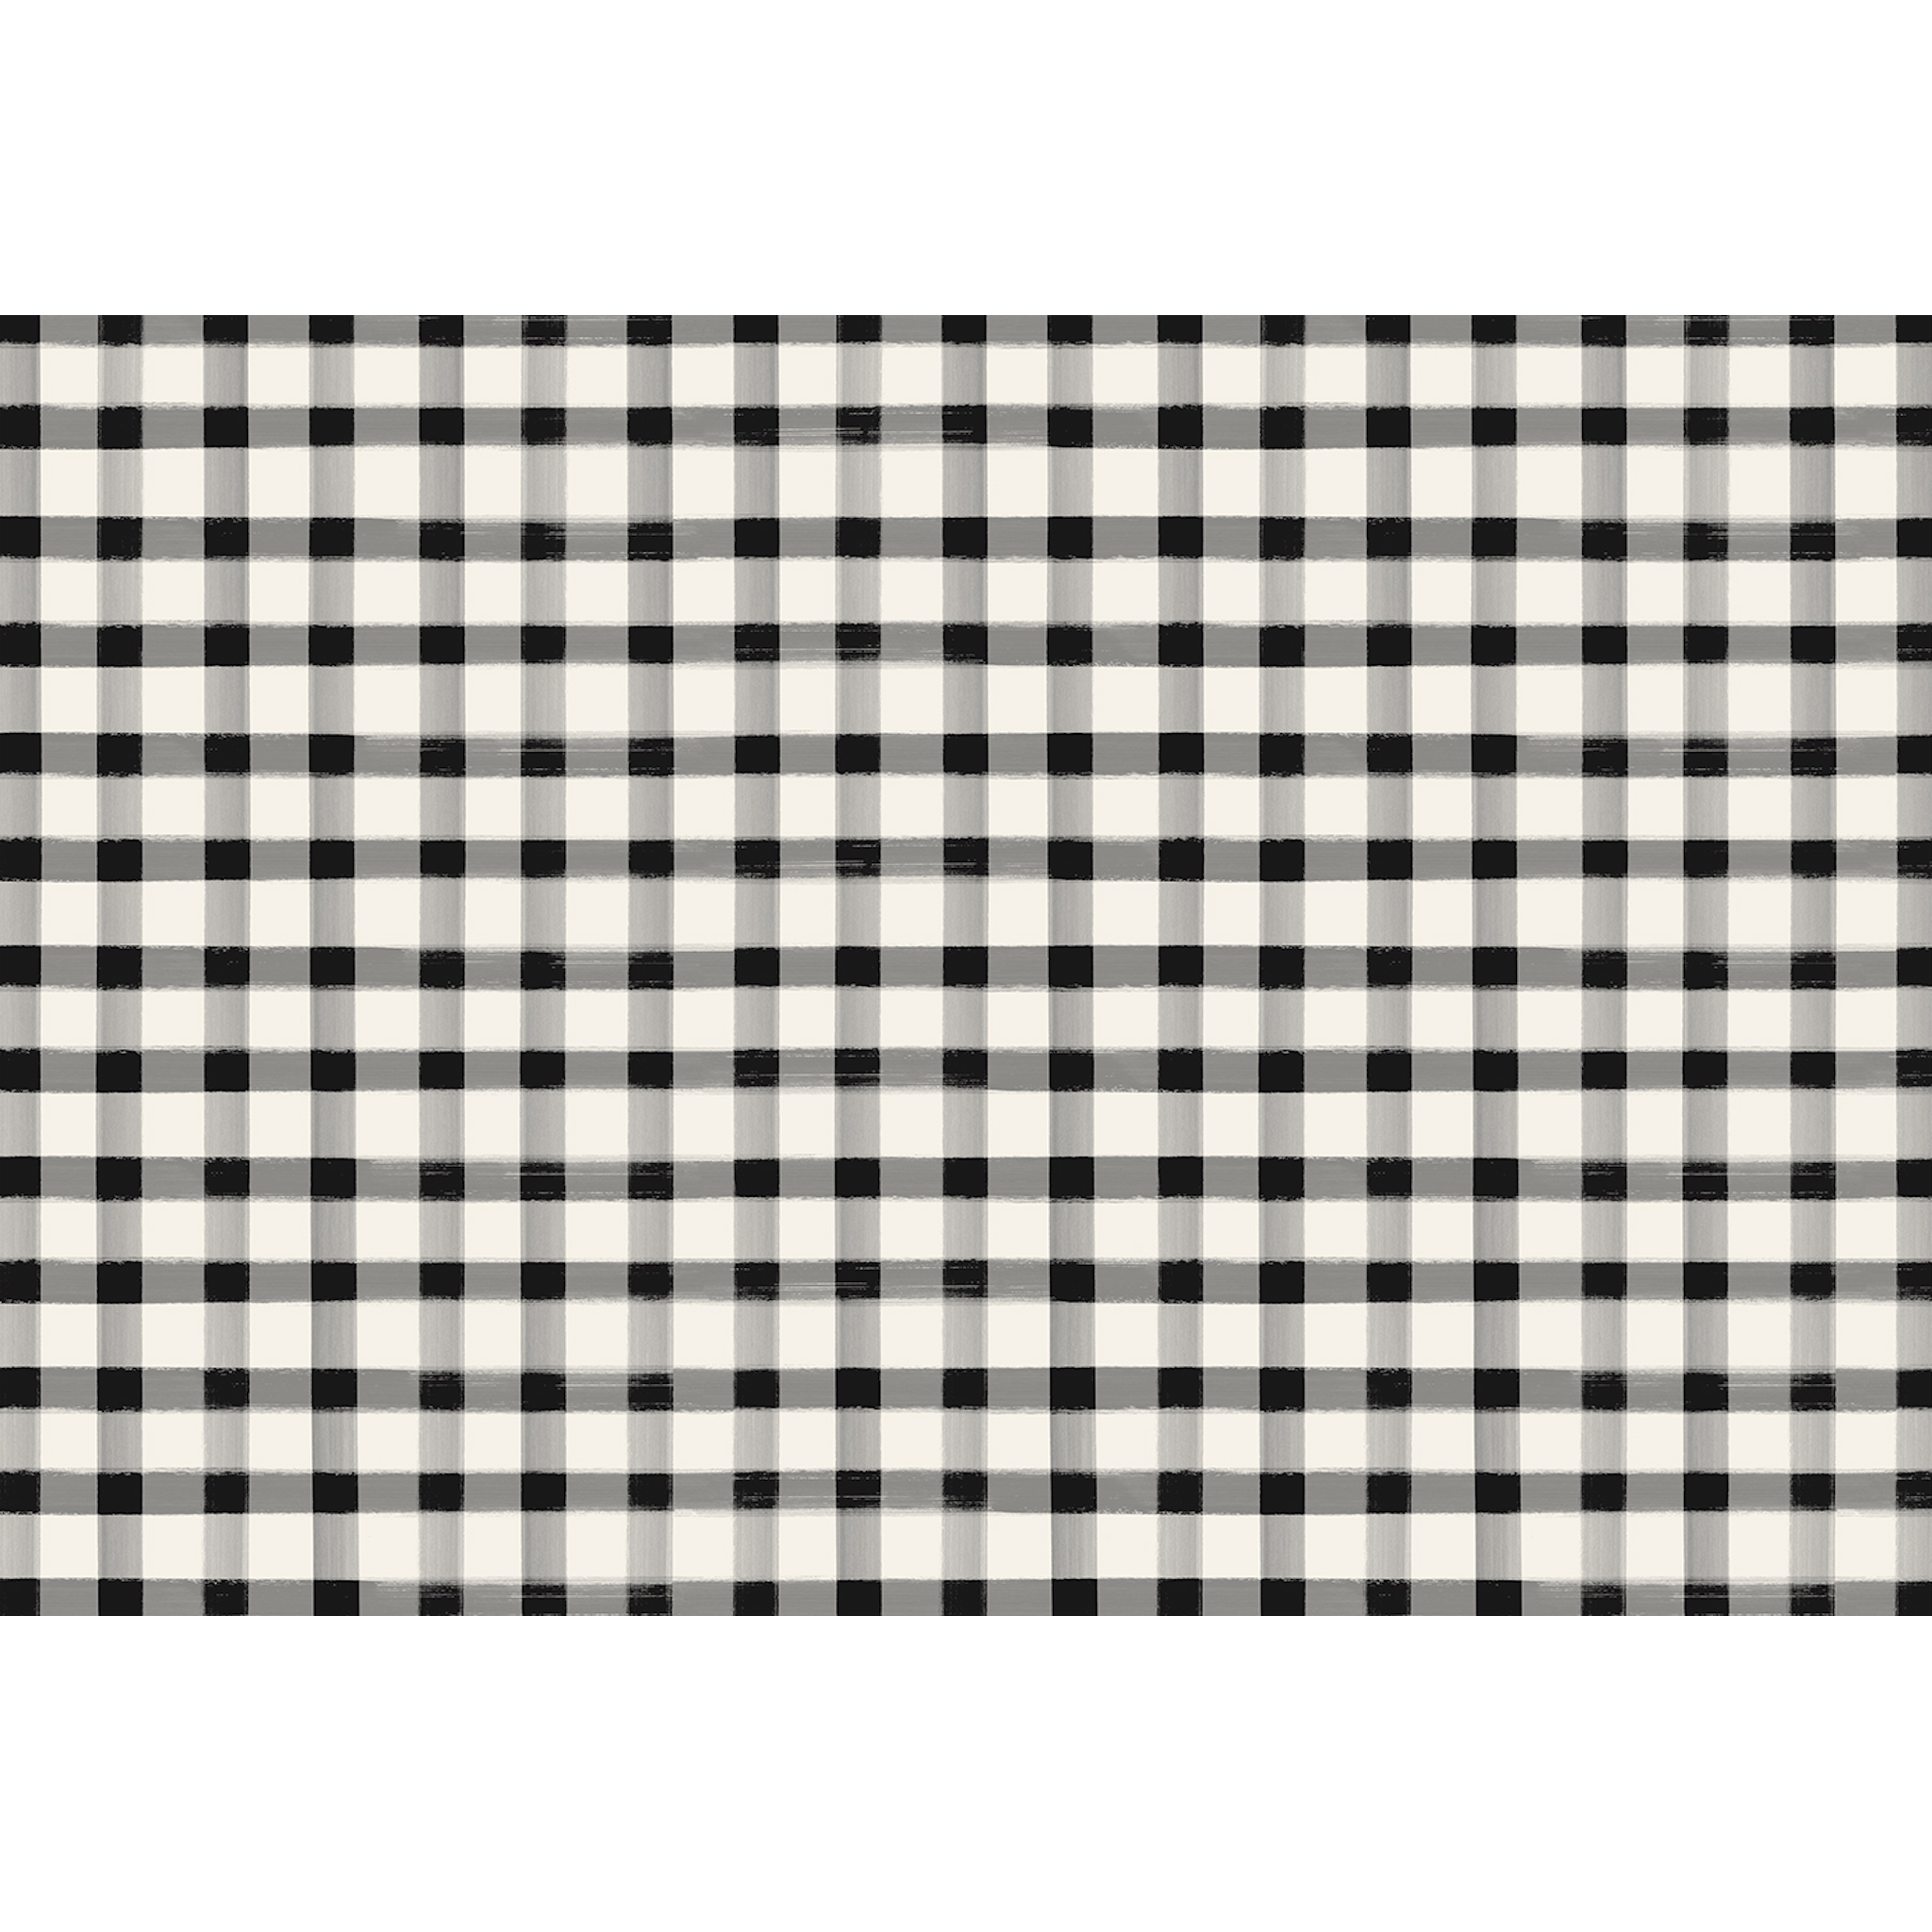 A painted grid check pattern made of grey lines intersecting at black squares, on a white background.